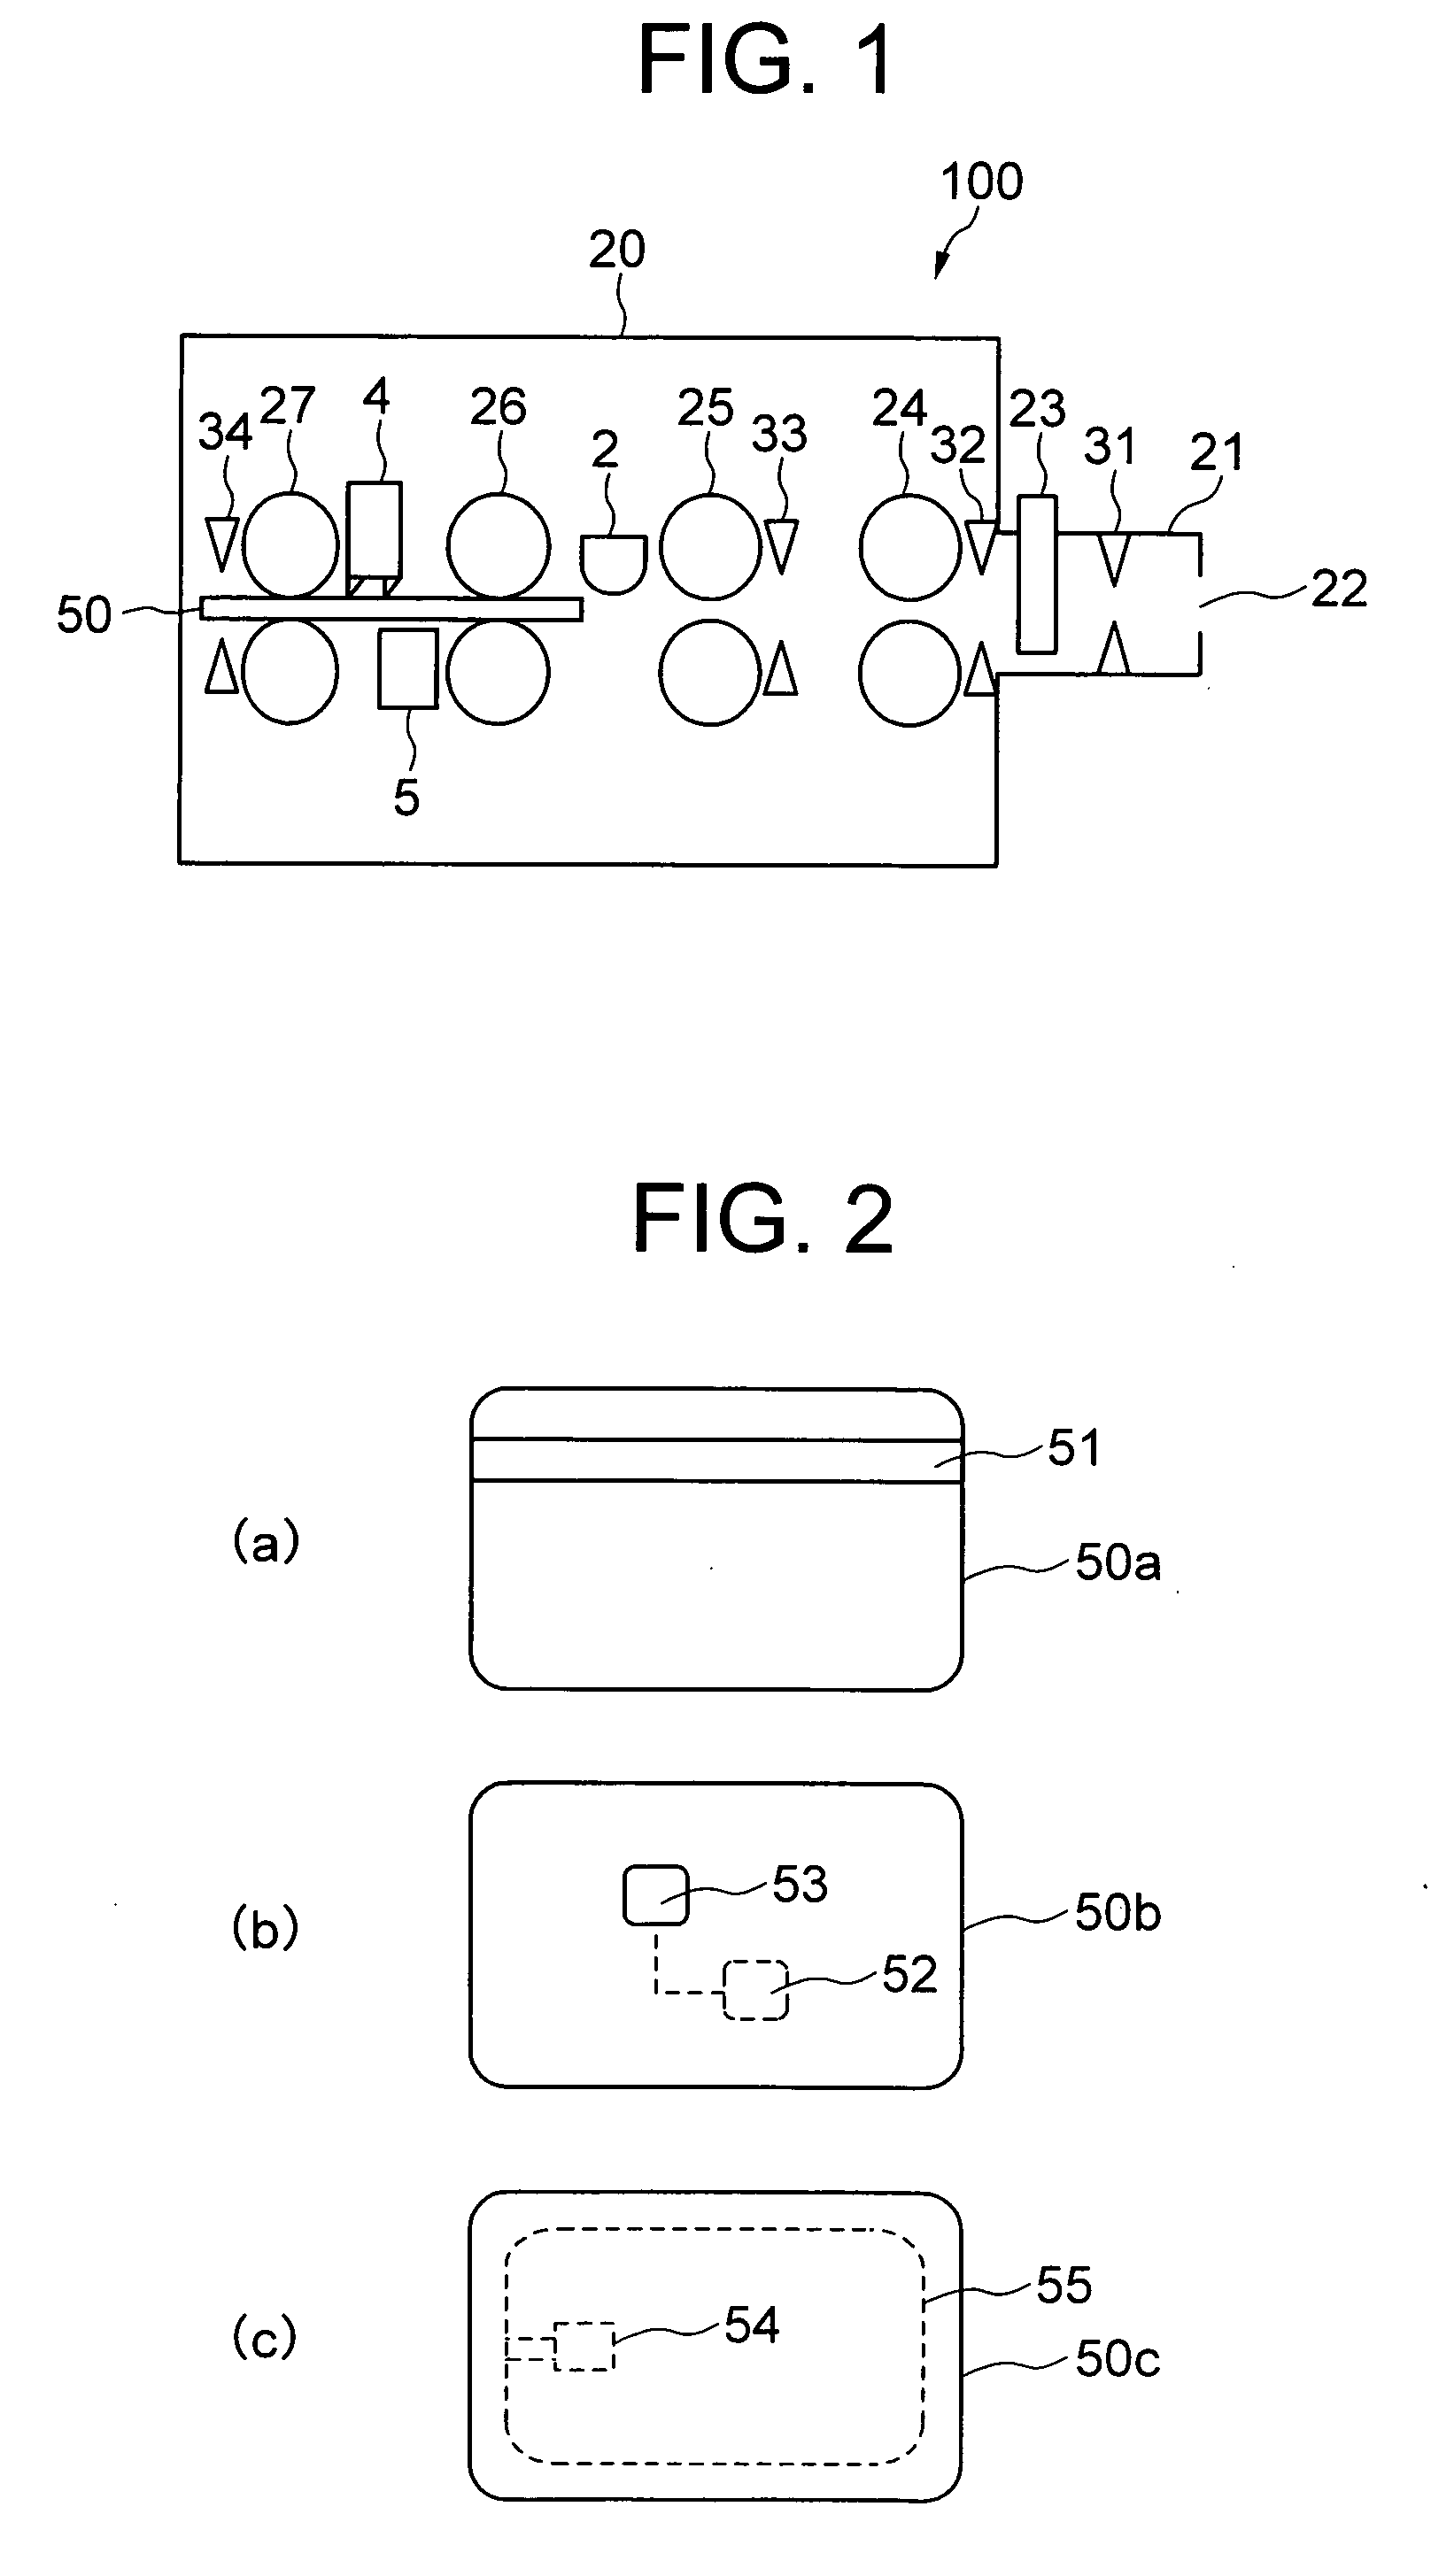 Card processing device